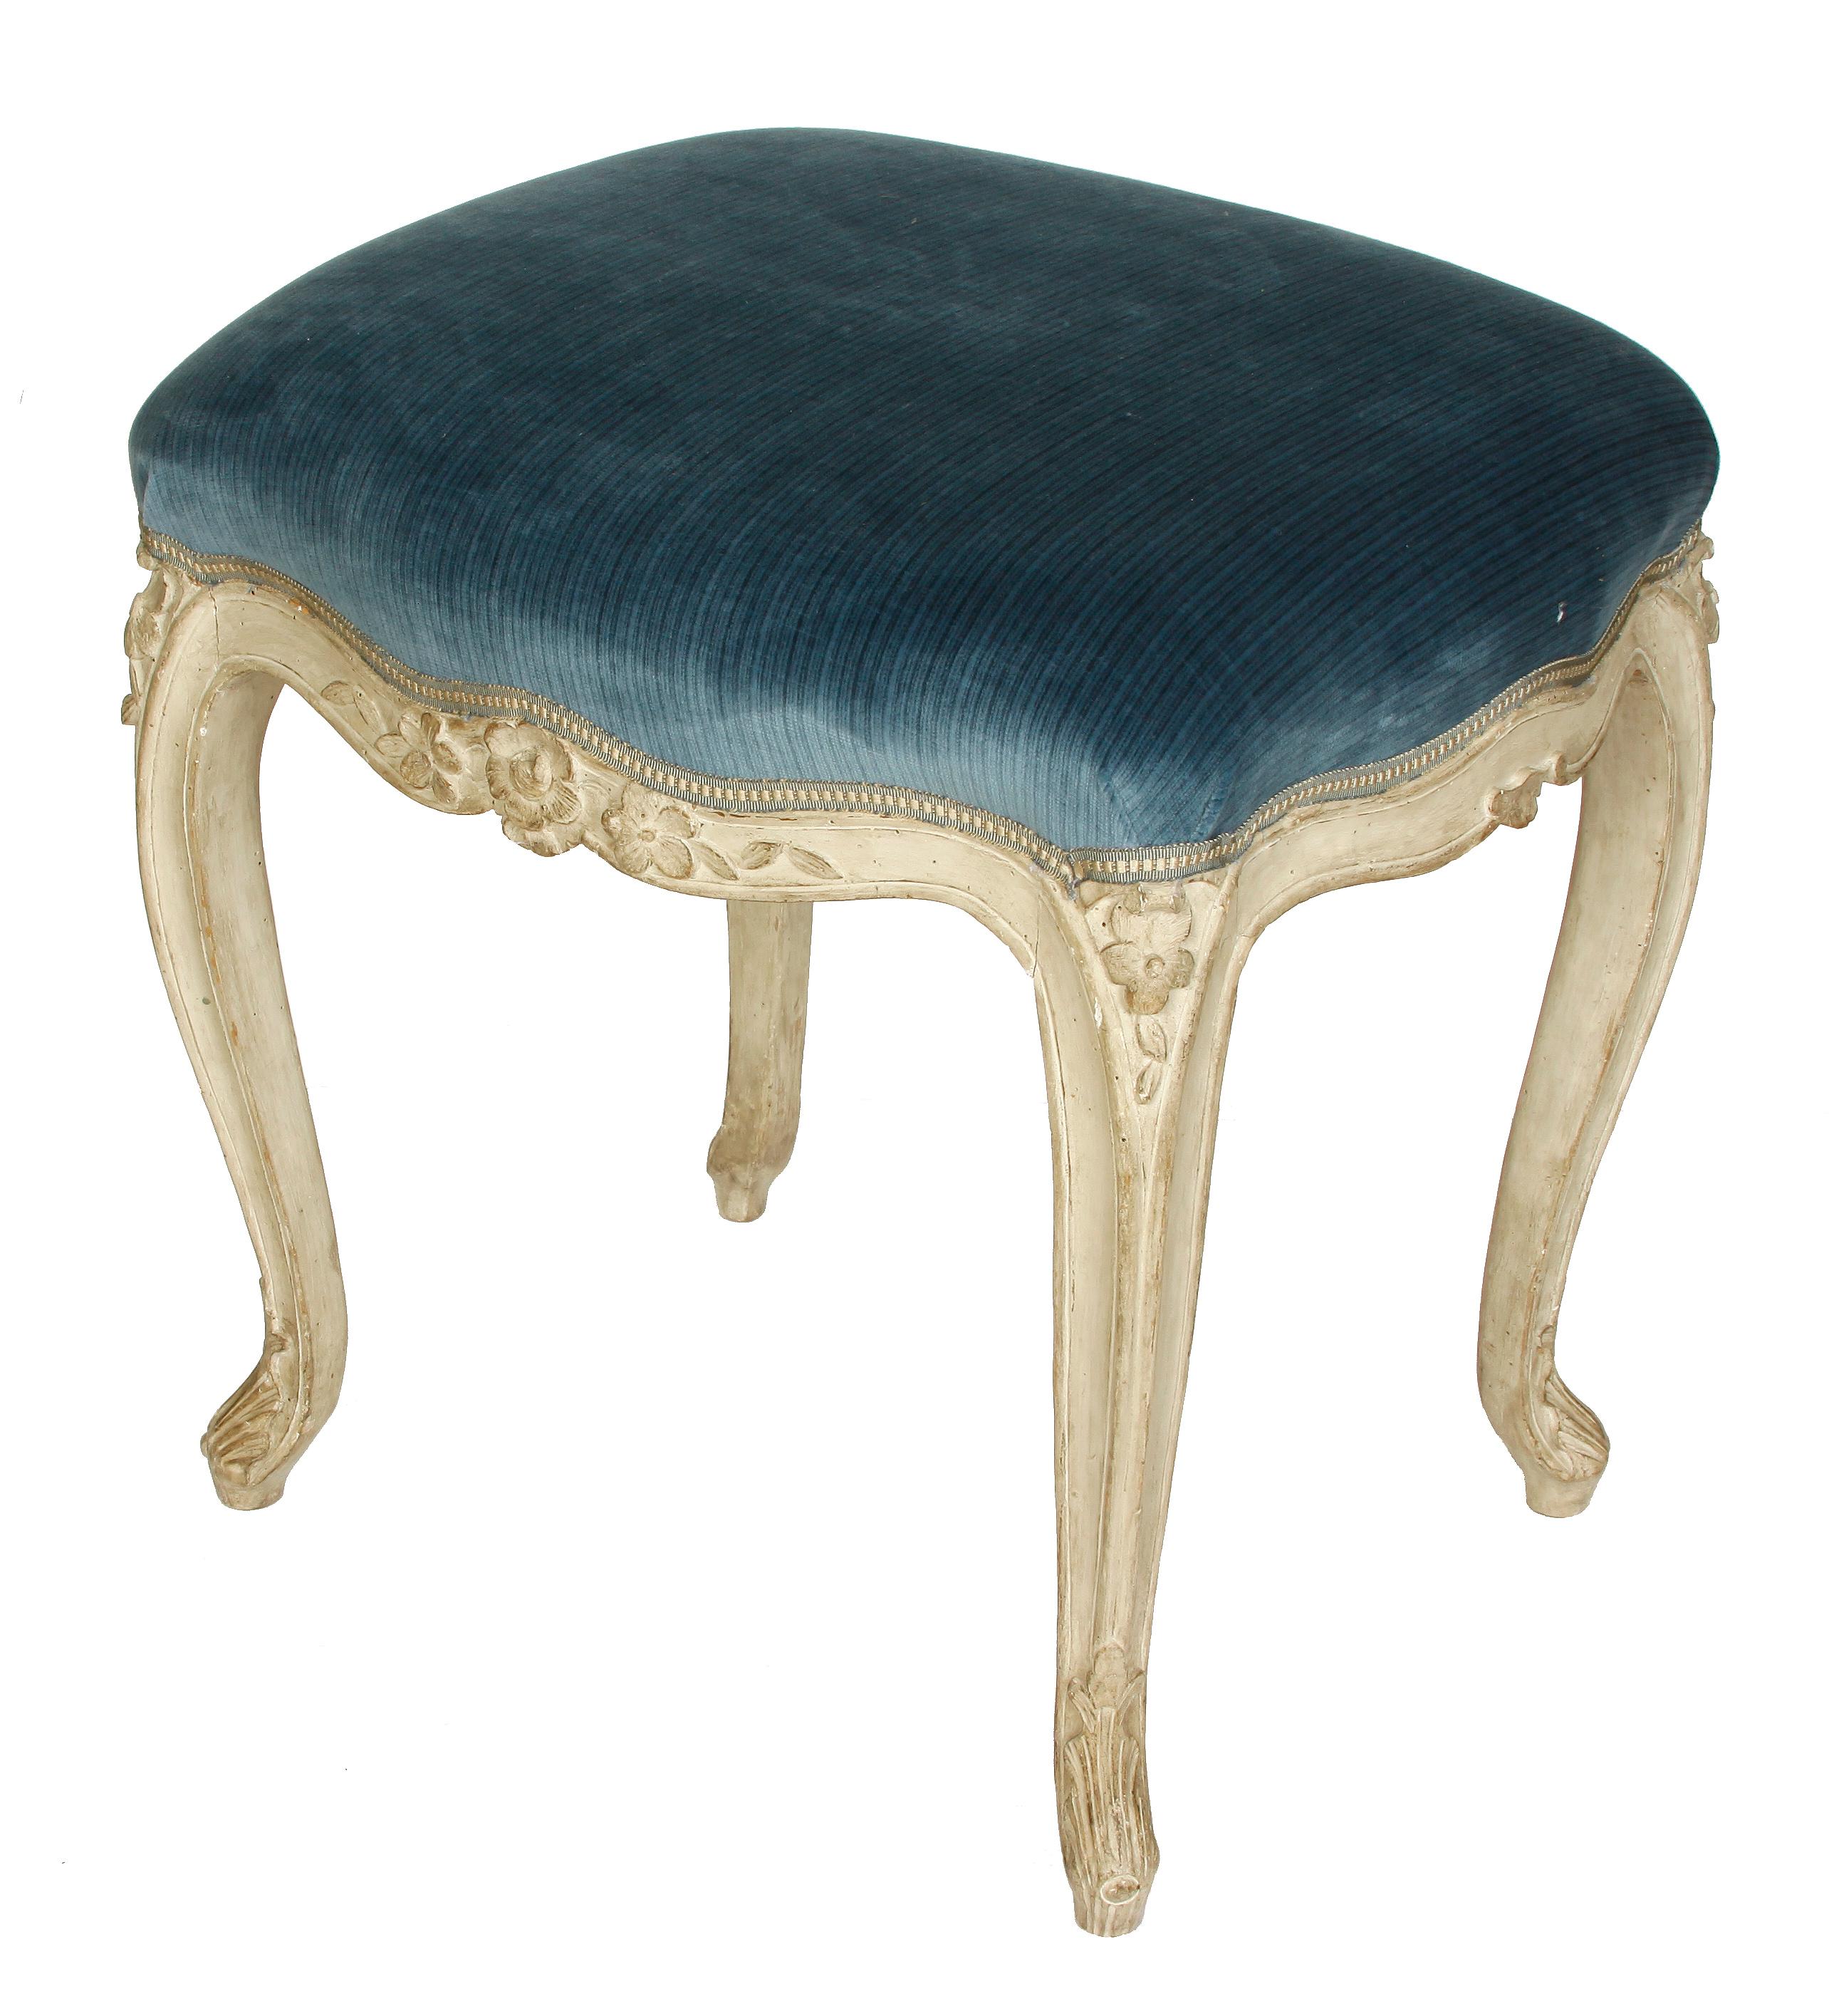 A pair of Louis XV style stools in blue strie velvet. Elegant stools with whitewashed base and cabriole legs with carved floral details.